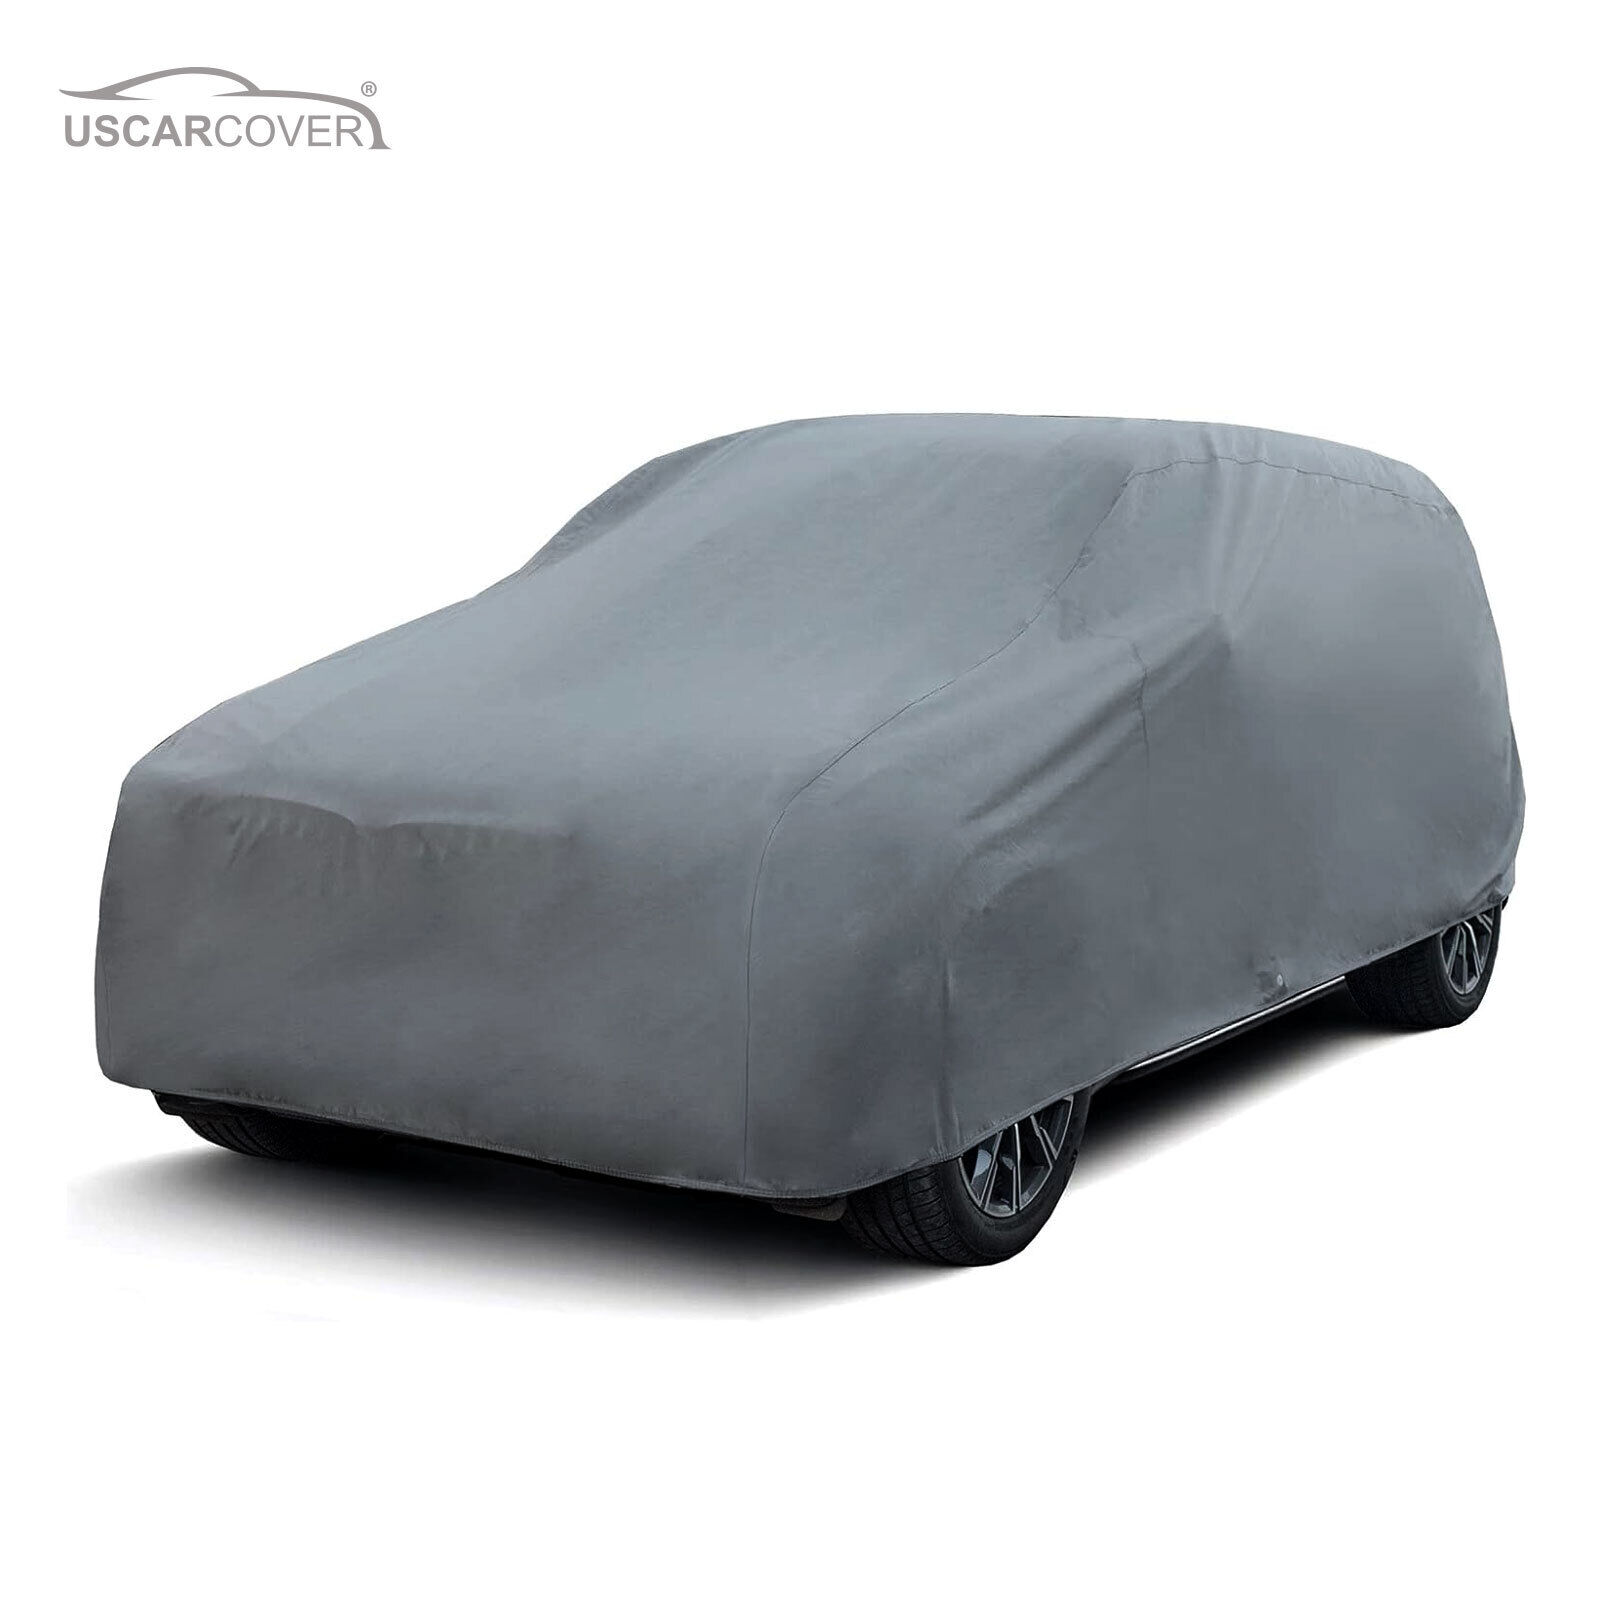 DaShield Ultimum Series Waterproof Car Cover for Jeep Willys 1940-1957 SUV